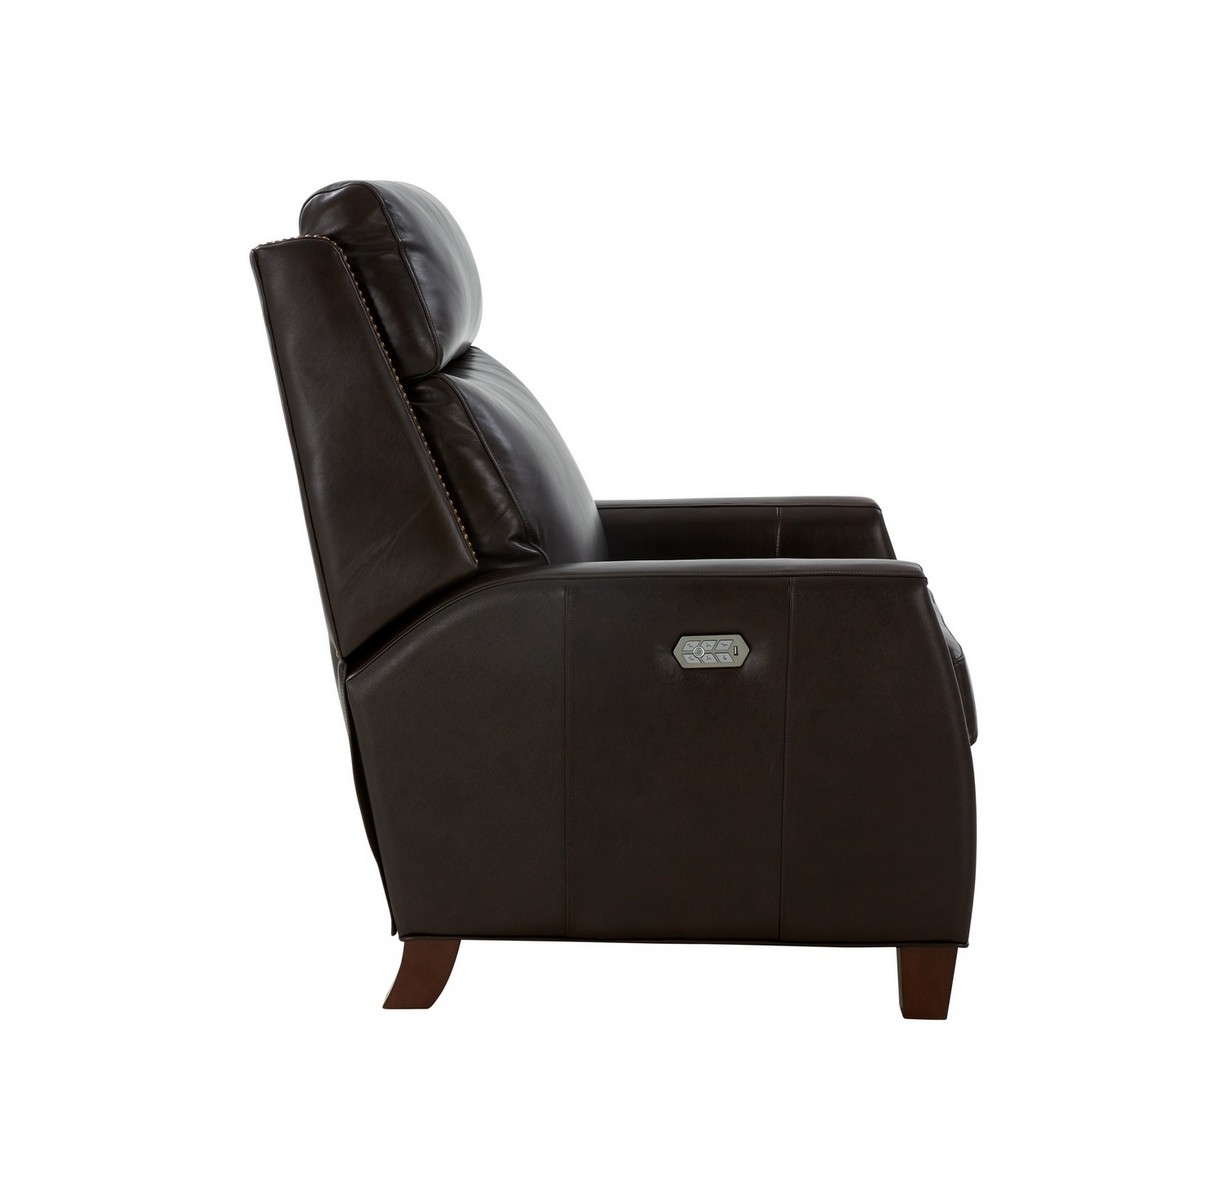 Barcalounger Anaheim Big and Tall Power Recliner Chair with Power Head Rest and Lumbar - Bennington Fudge/All Leather